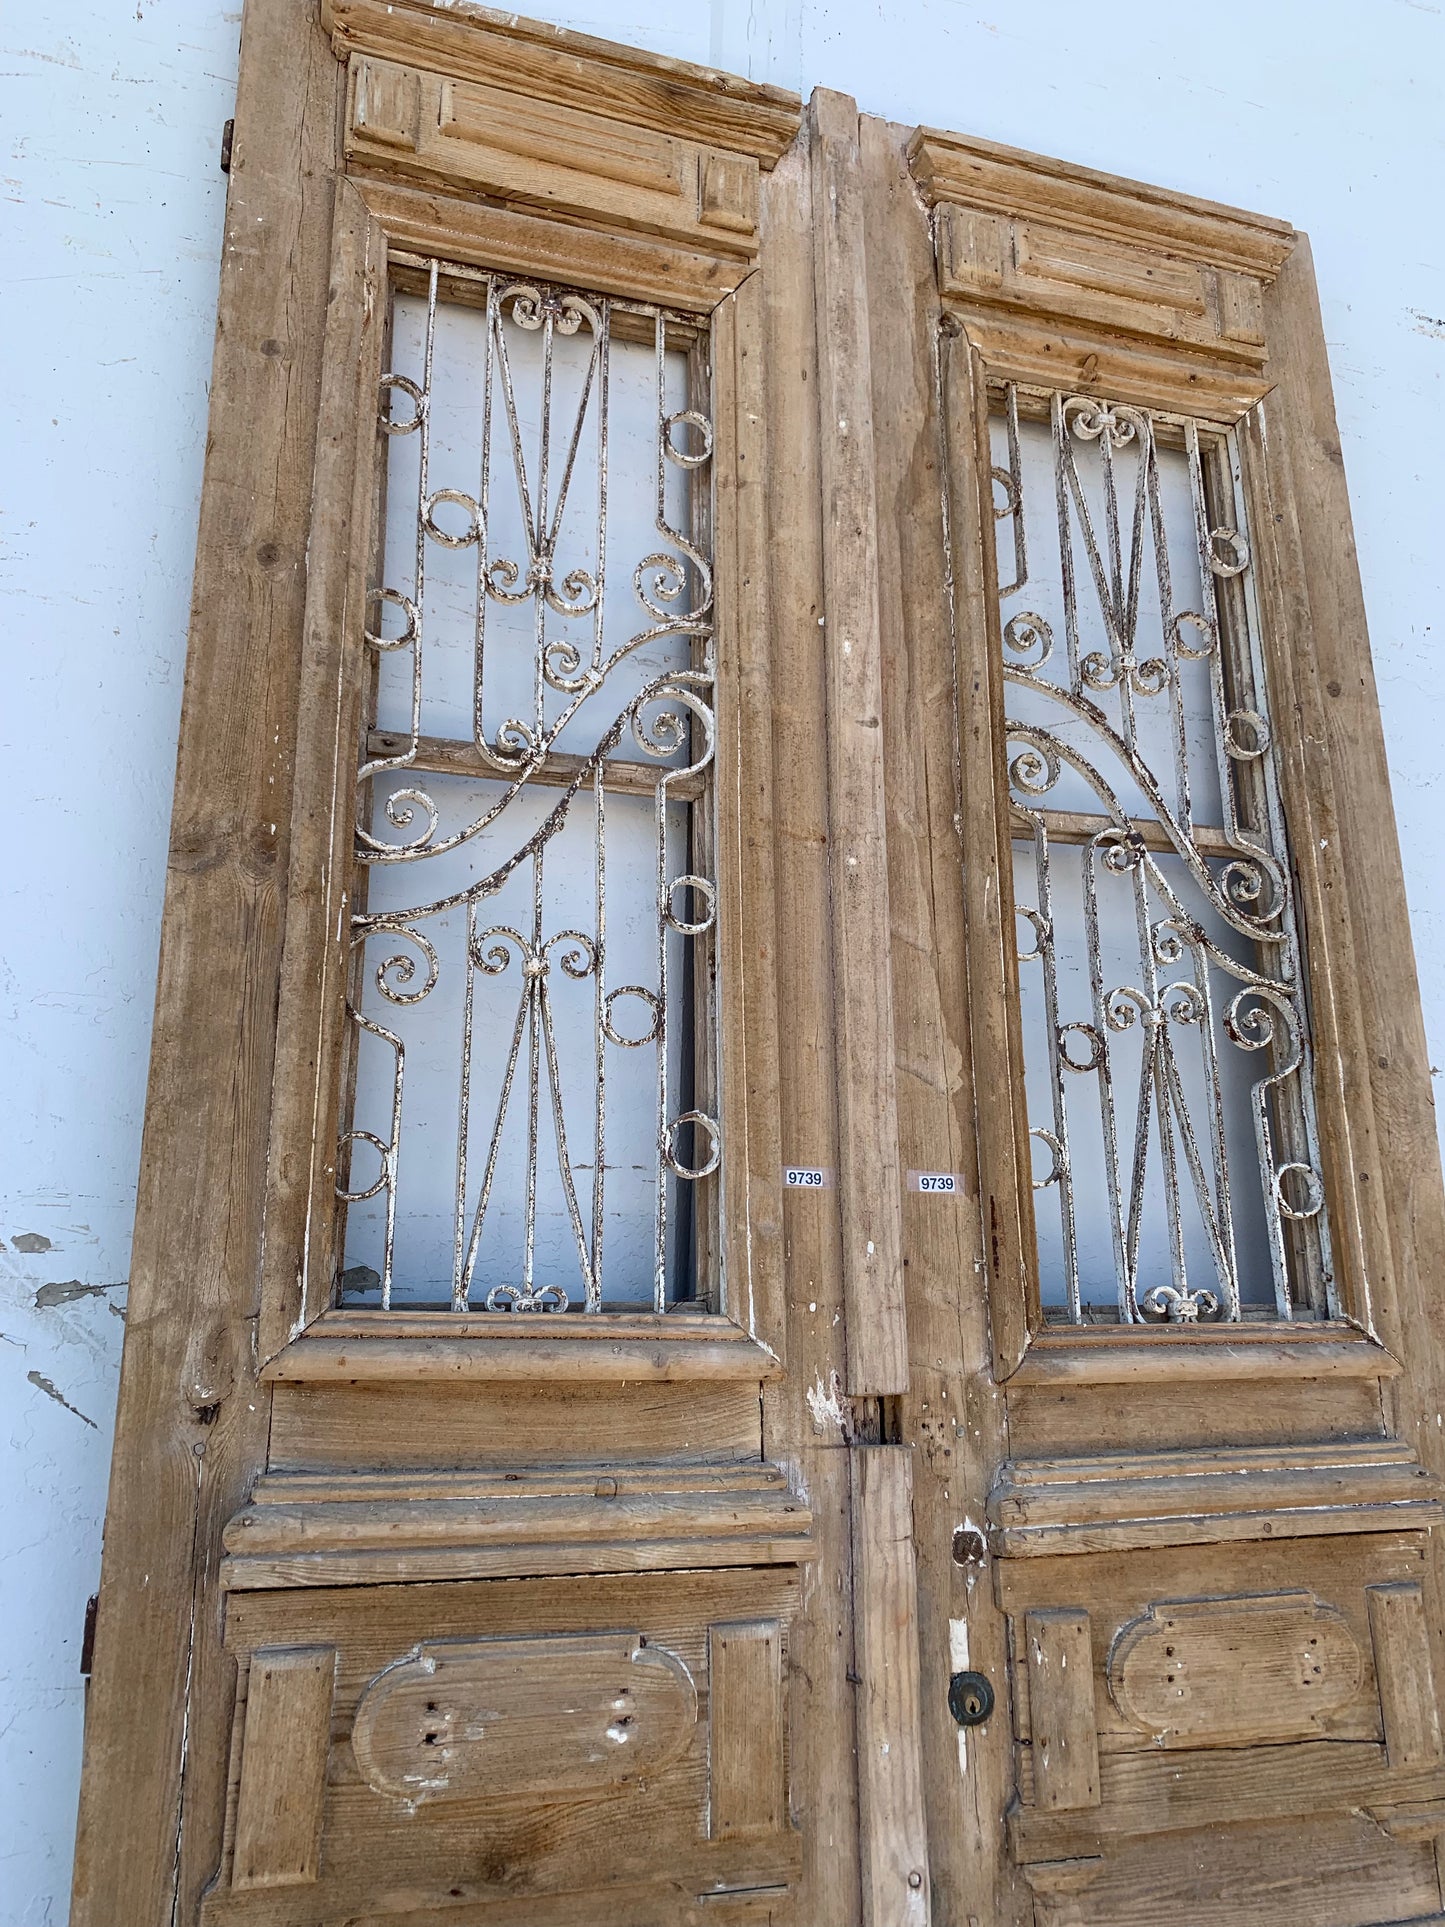 Pair of Natural Wood Antique Doors with Iron Inserts (no glass)